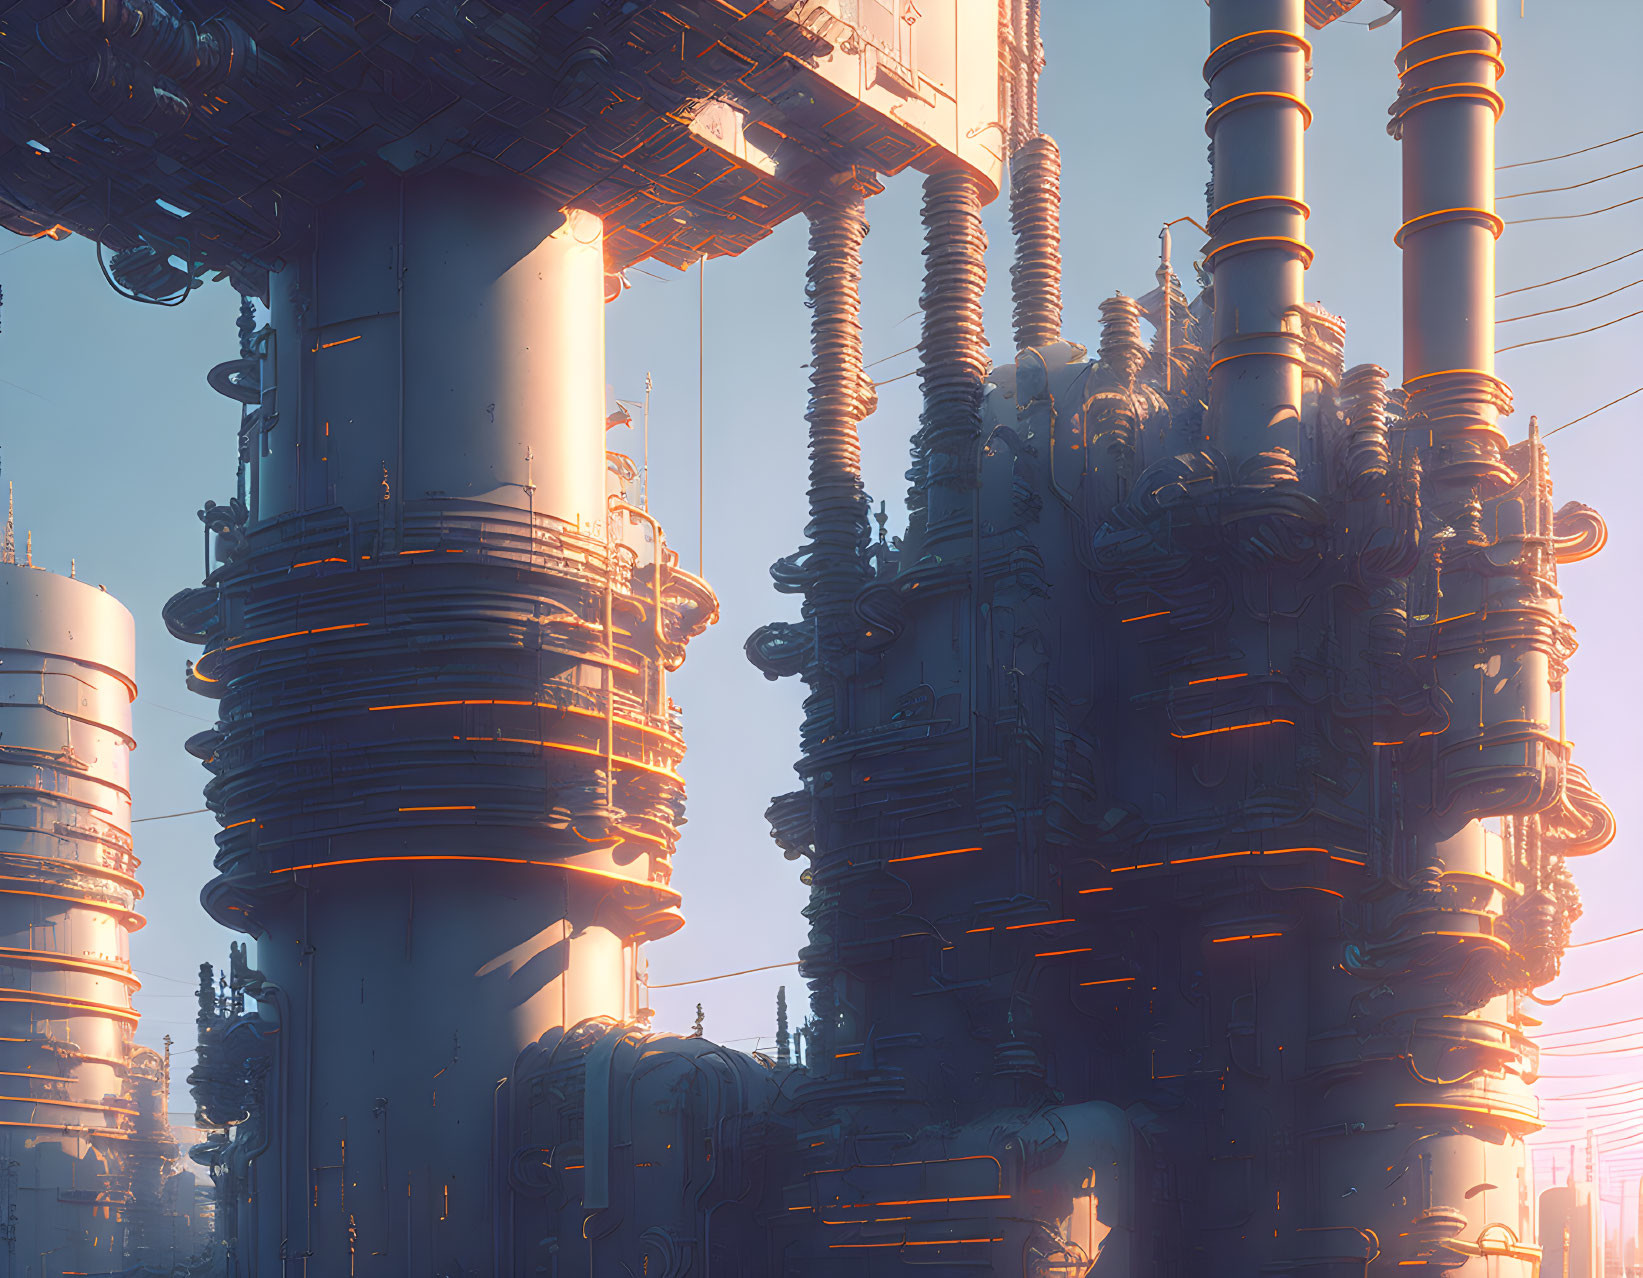 Futuristic industrial towers with glowing rings and intricate pipes in golden light.